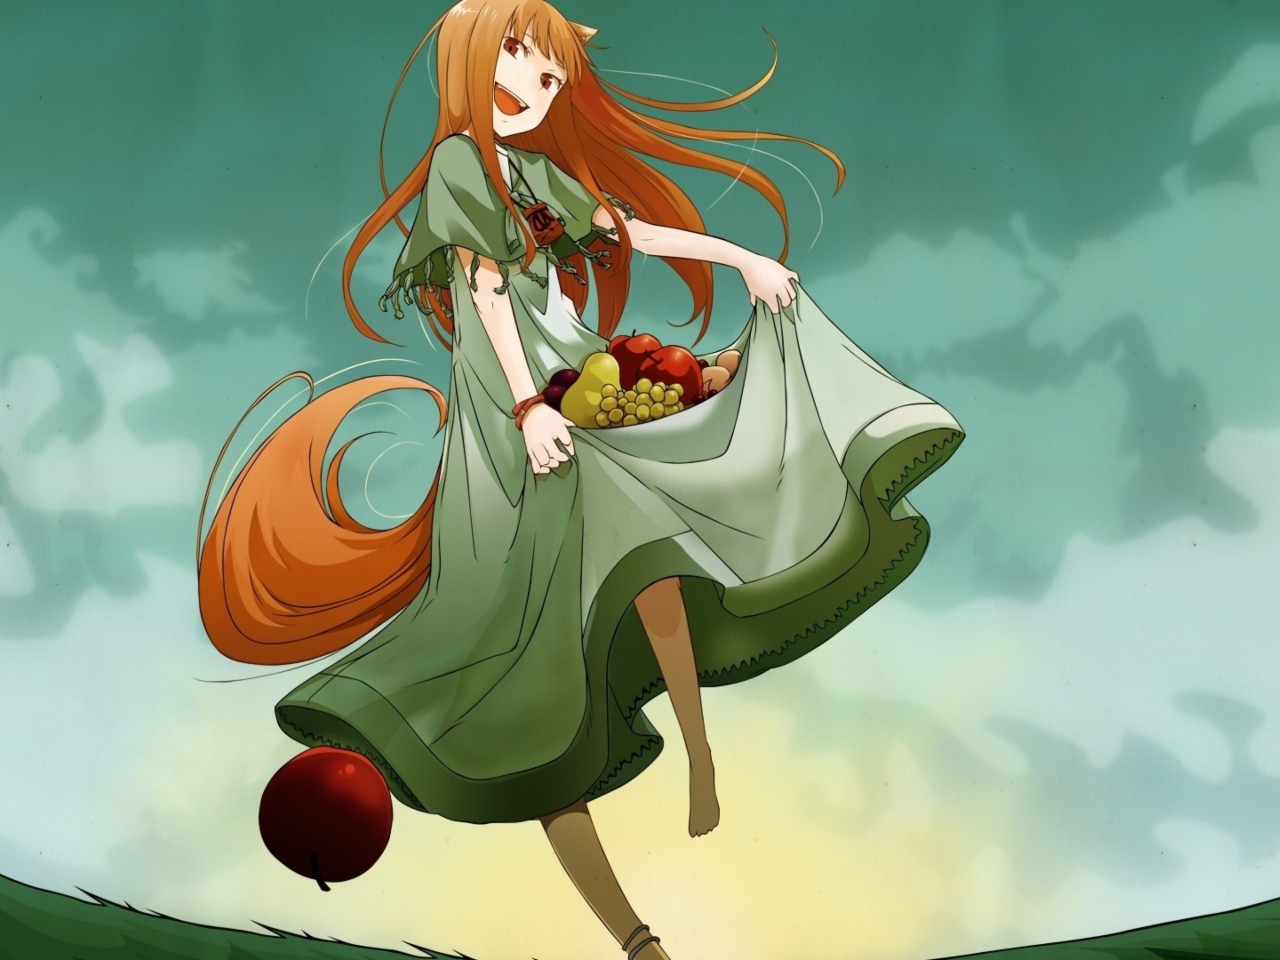 Spice and Wolf wallpaper 1280x960